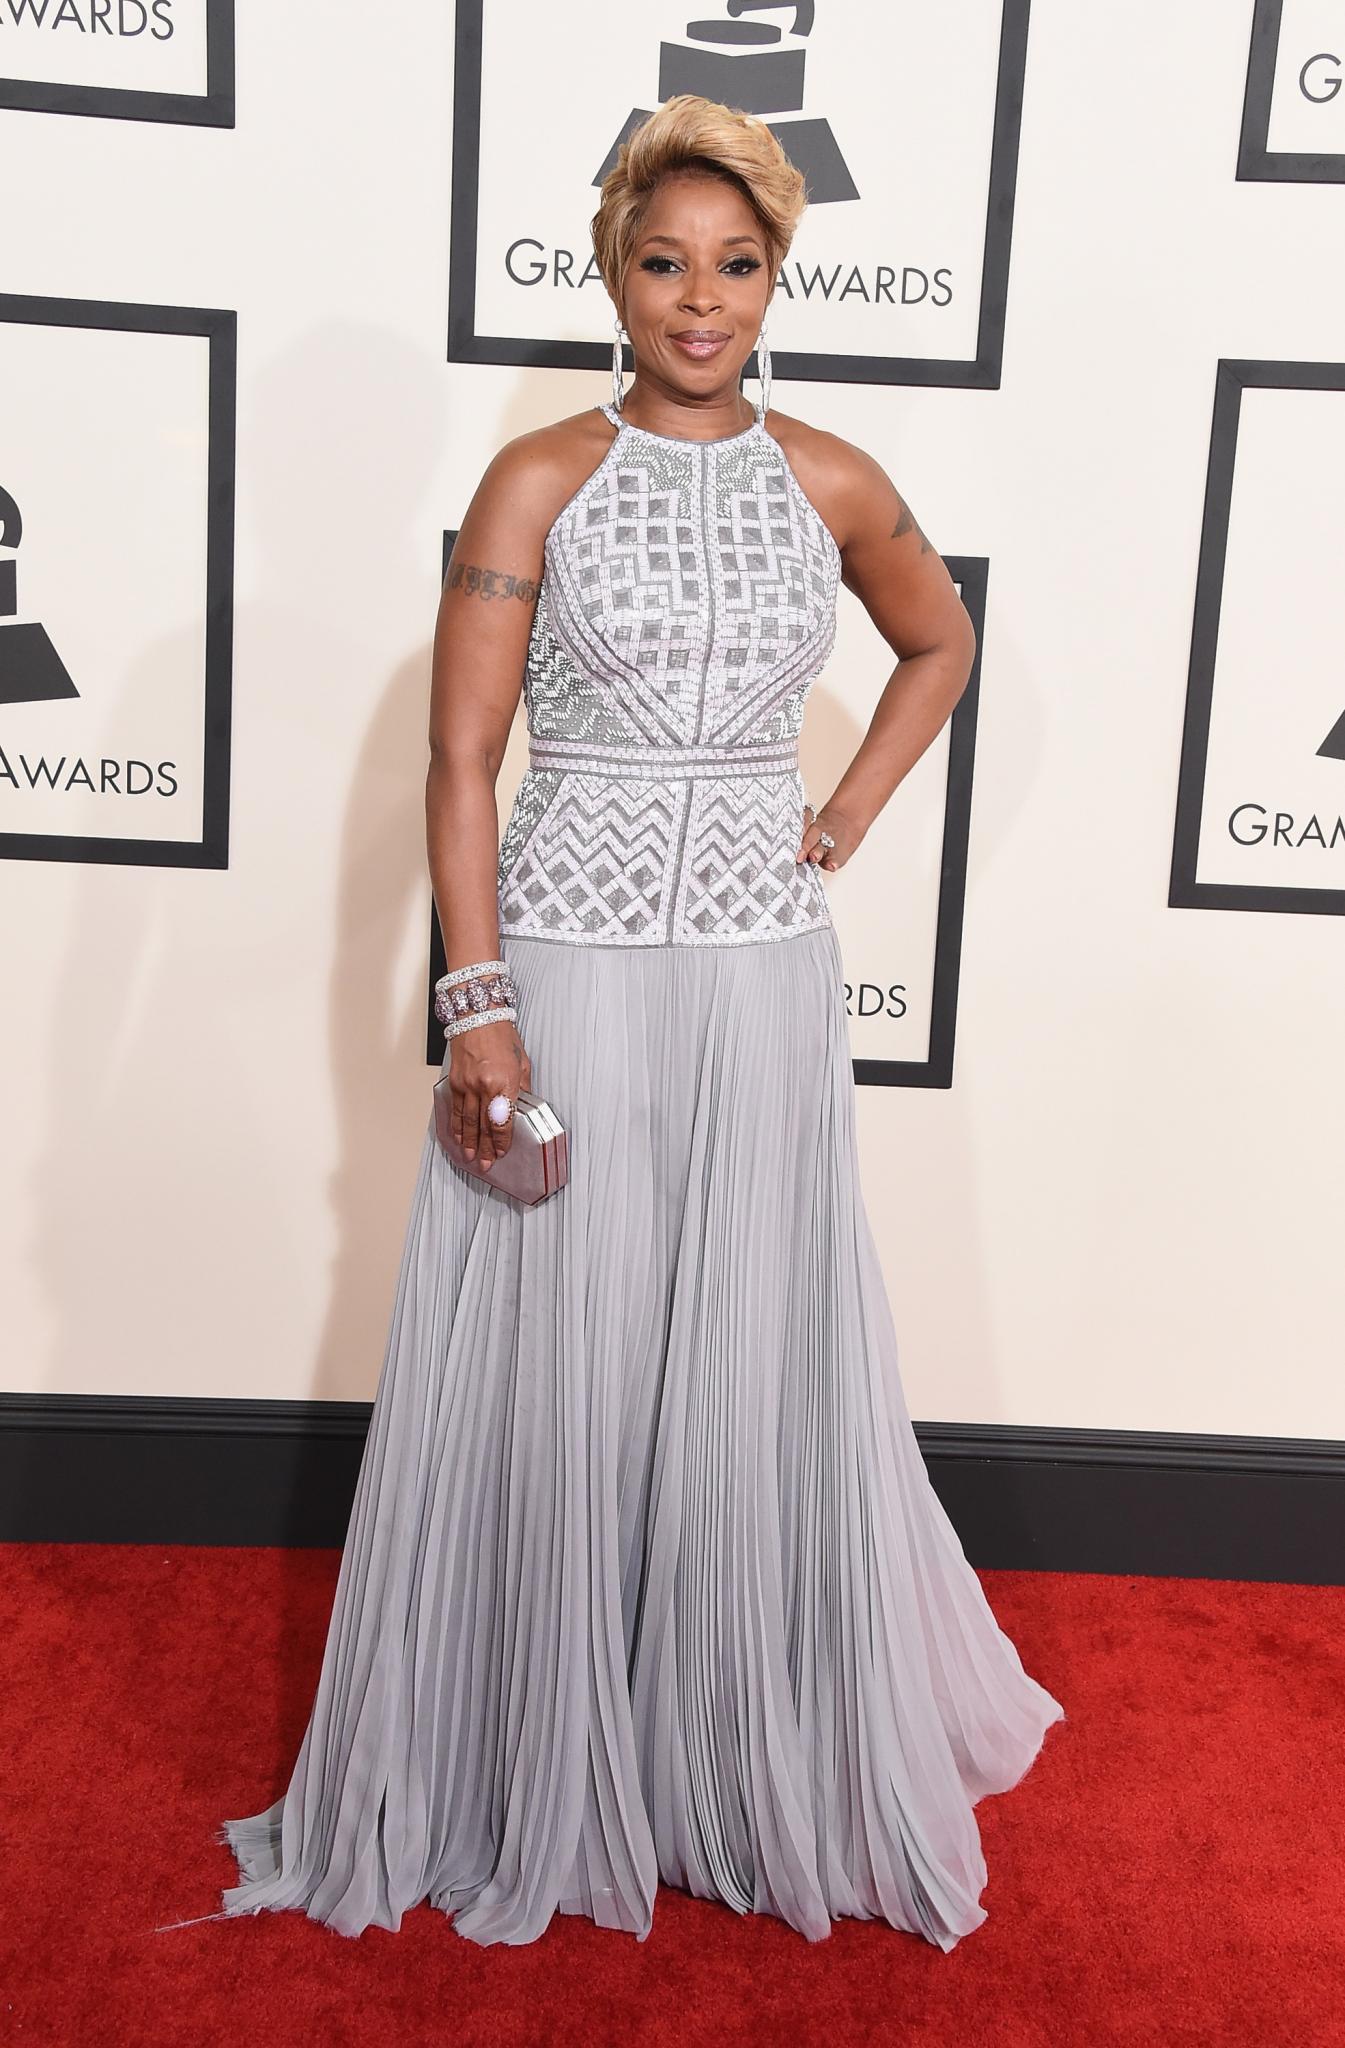 #WCW: Mary J. Blige's Hottest Red Carpet Looks